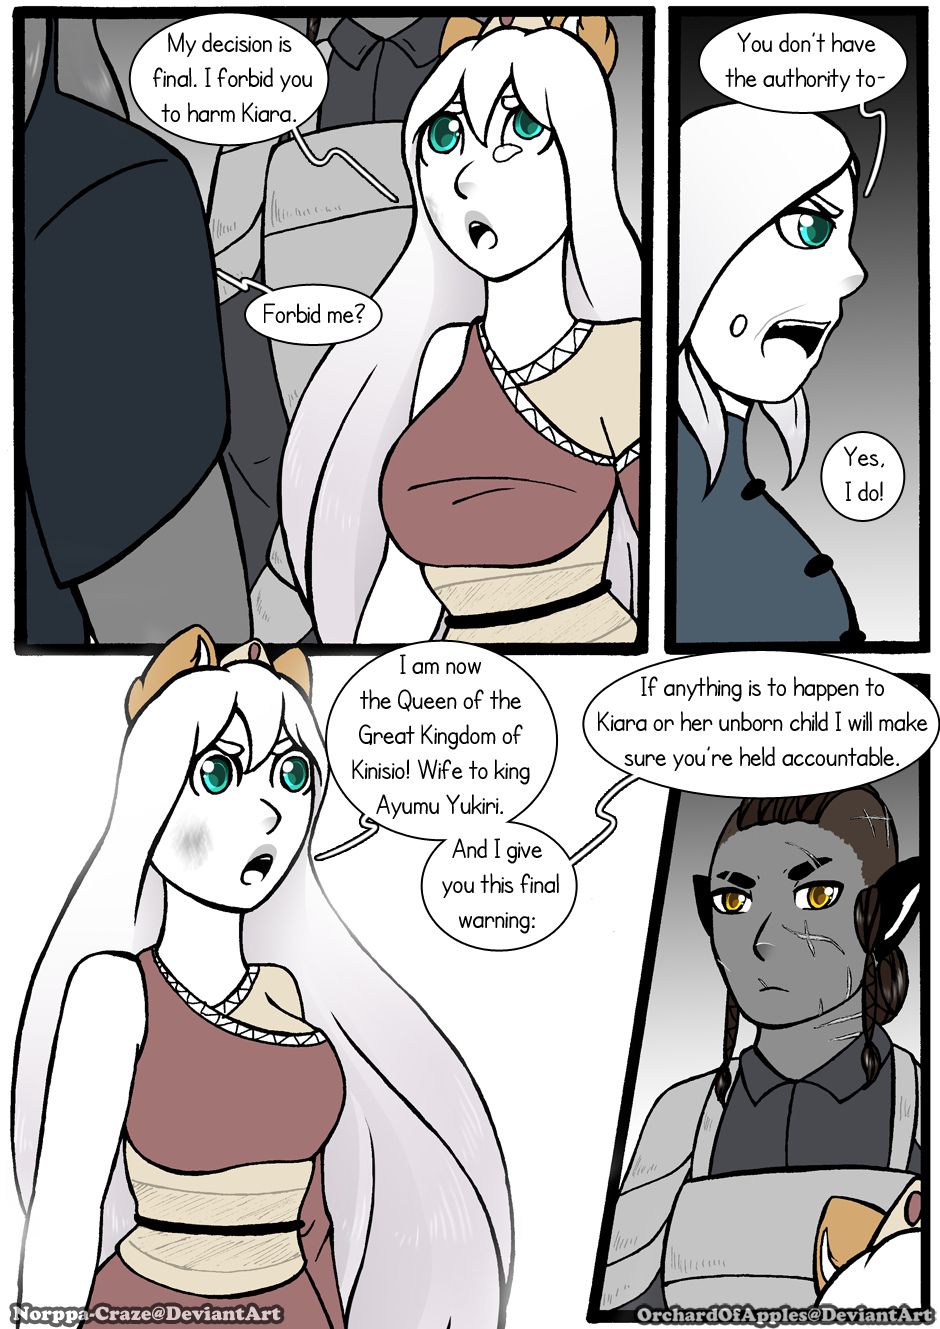 [Jeny-jen94] Between Kings and Queens [Ongoing] 283